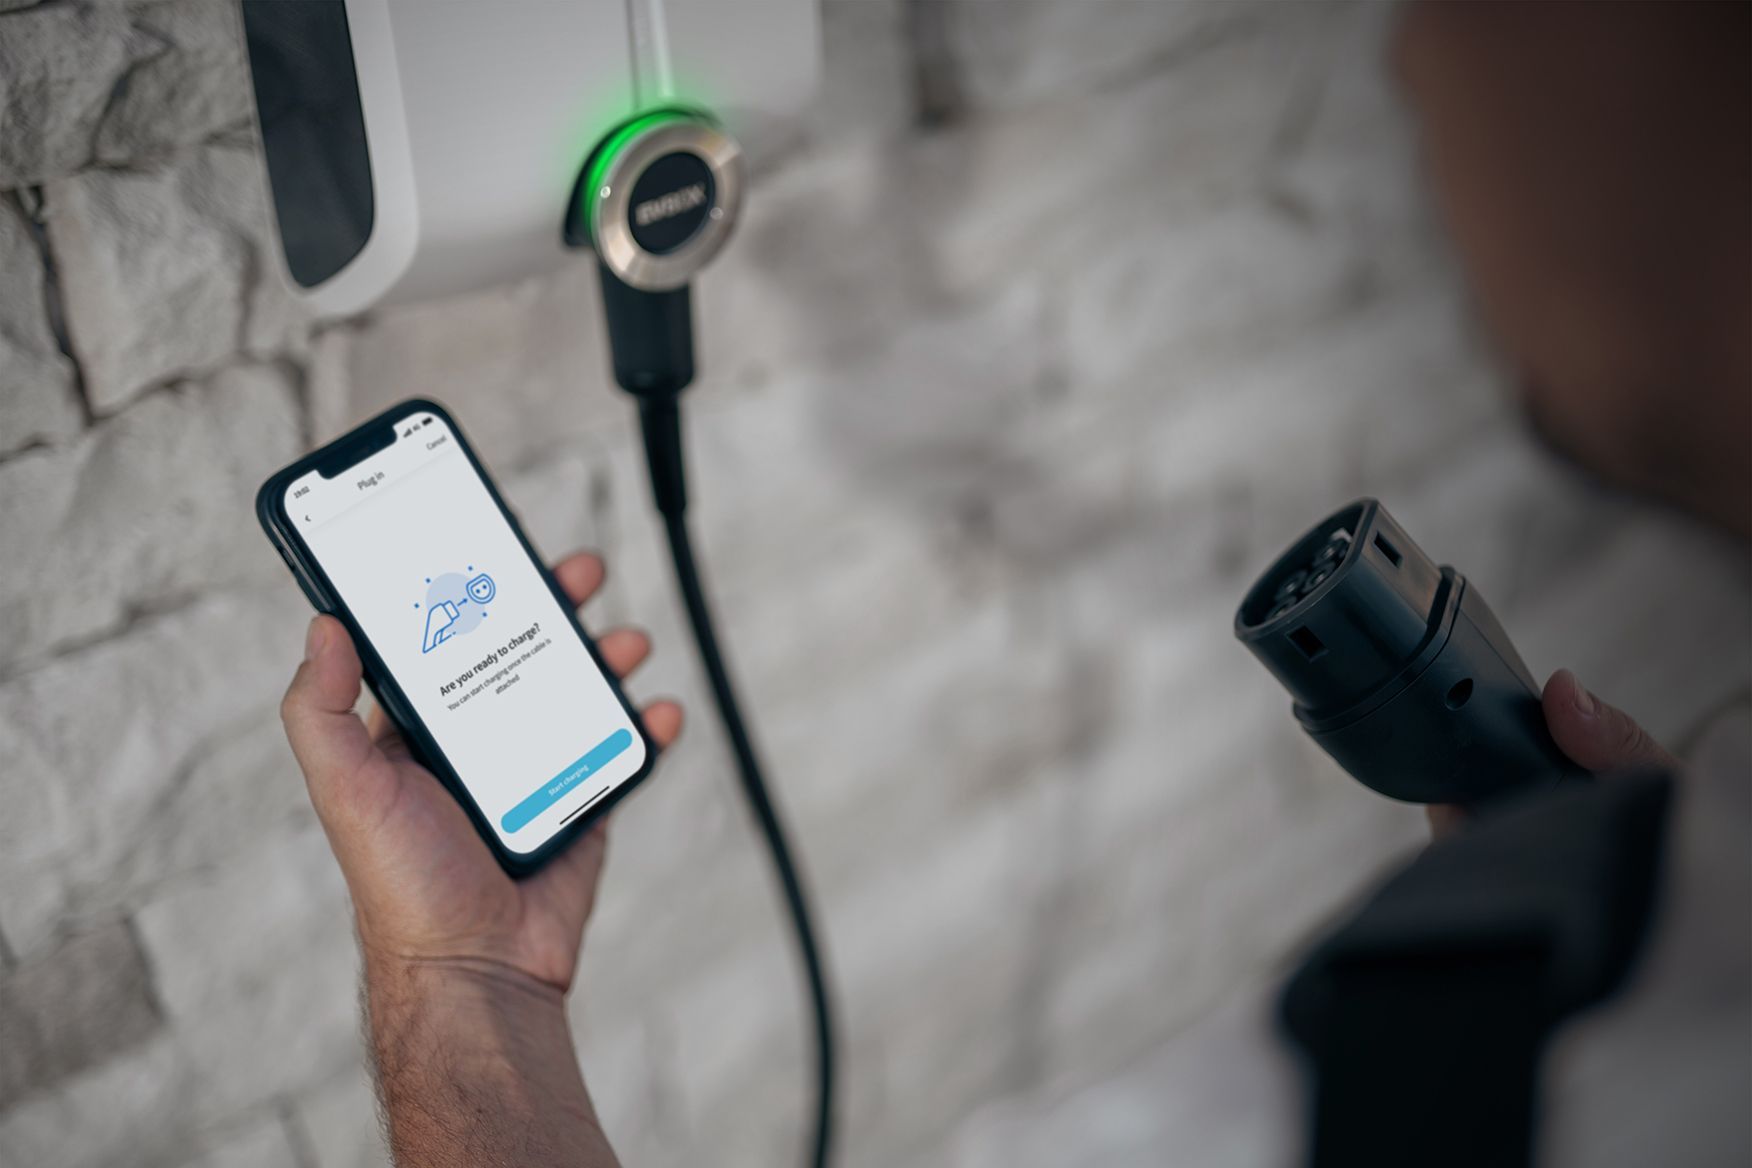 The owner of the EVBox Elvi charging station is looking at his phone that is open to the smart charger app that is asking him if he is ready to start using his EVBox Elvi charger.